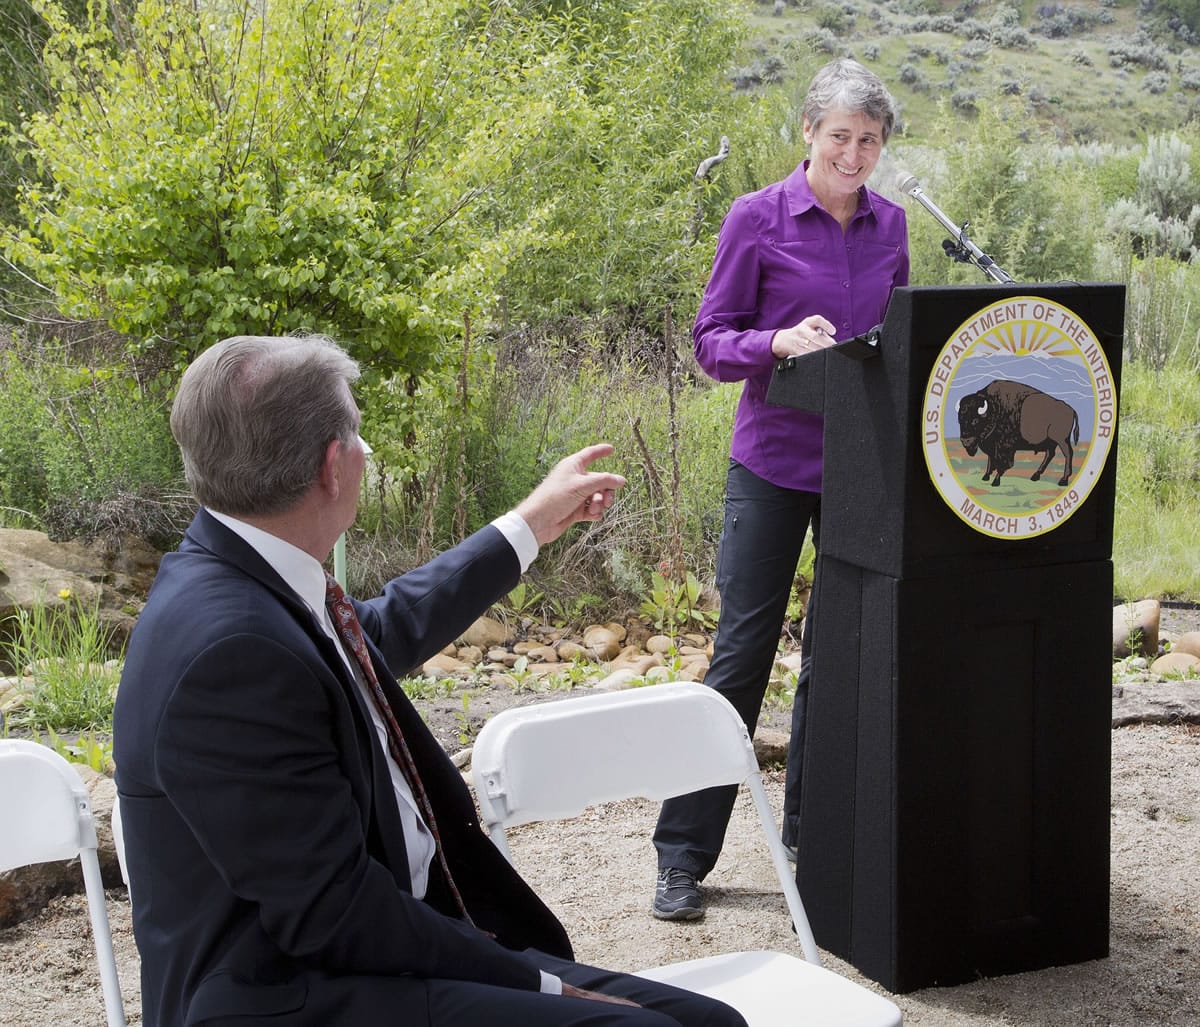 U.S. Secretary of the Interior Sally Jewell, right, smiles towards Idaho Gov. Butch Otter during a news conference Tuesday in Boise, Idaho.